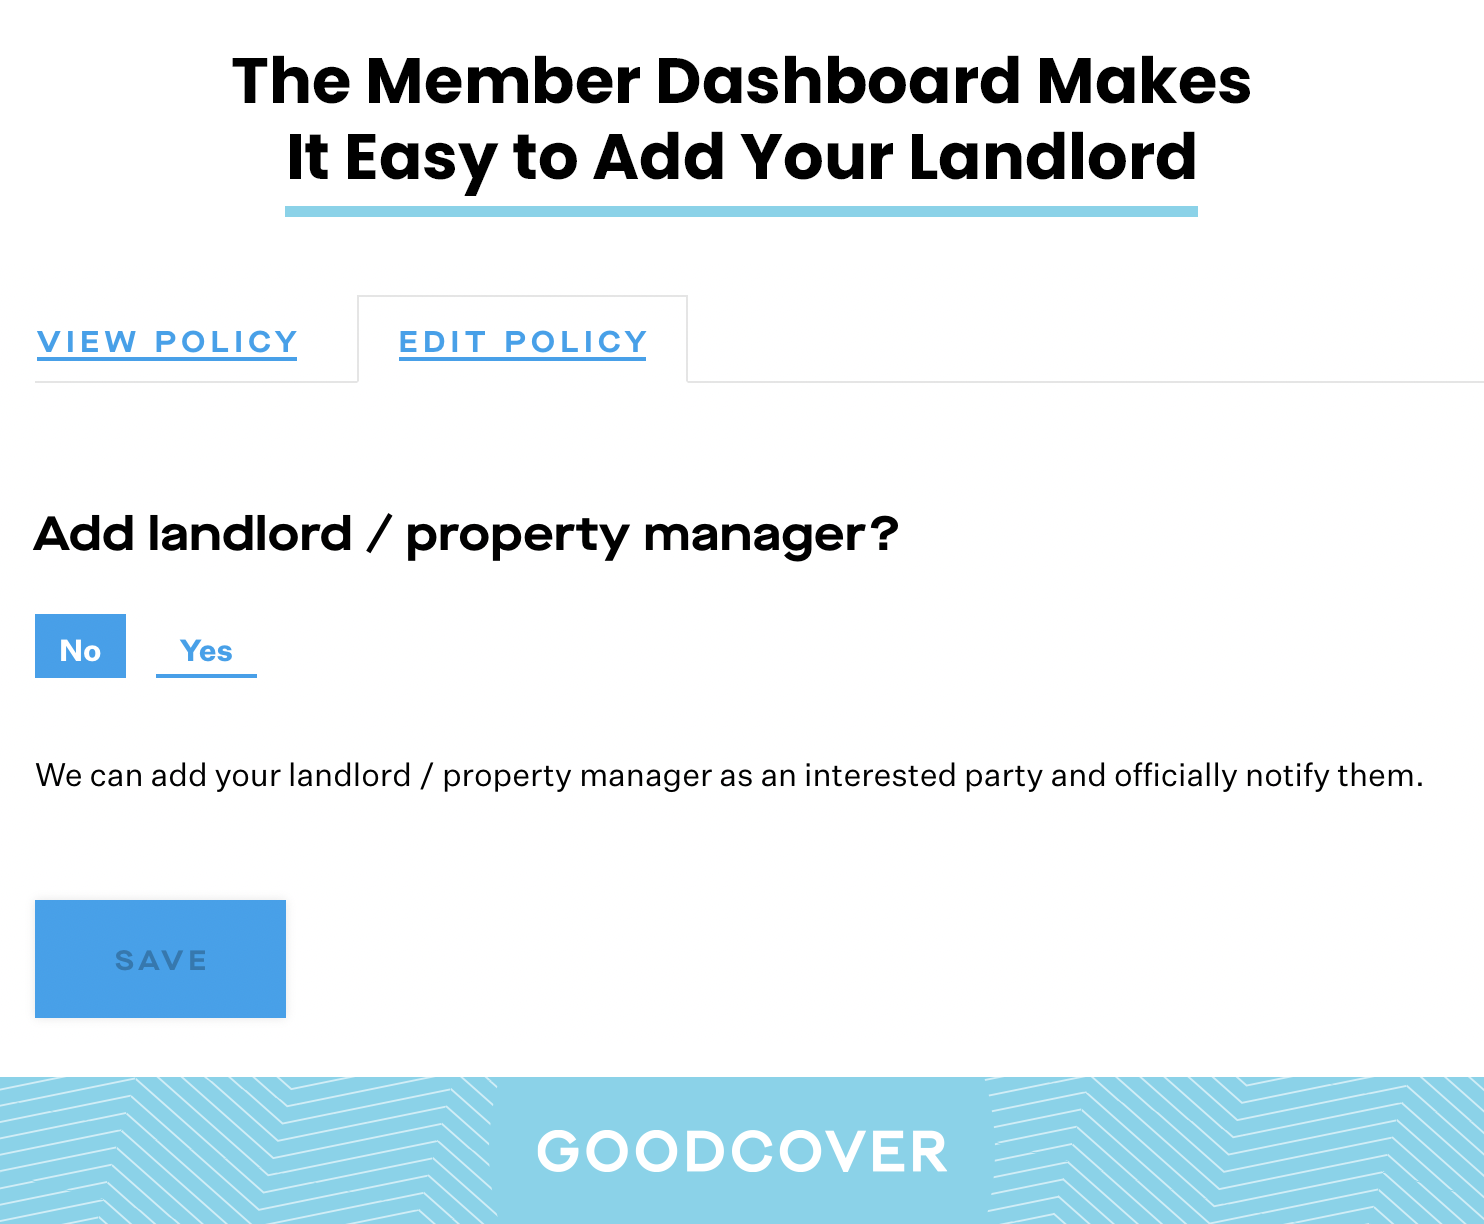 The Members Dashboard helps you add or remove your landlord as an interested party.